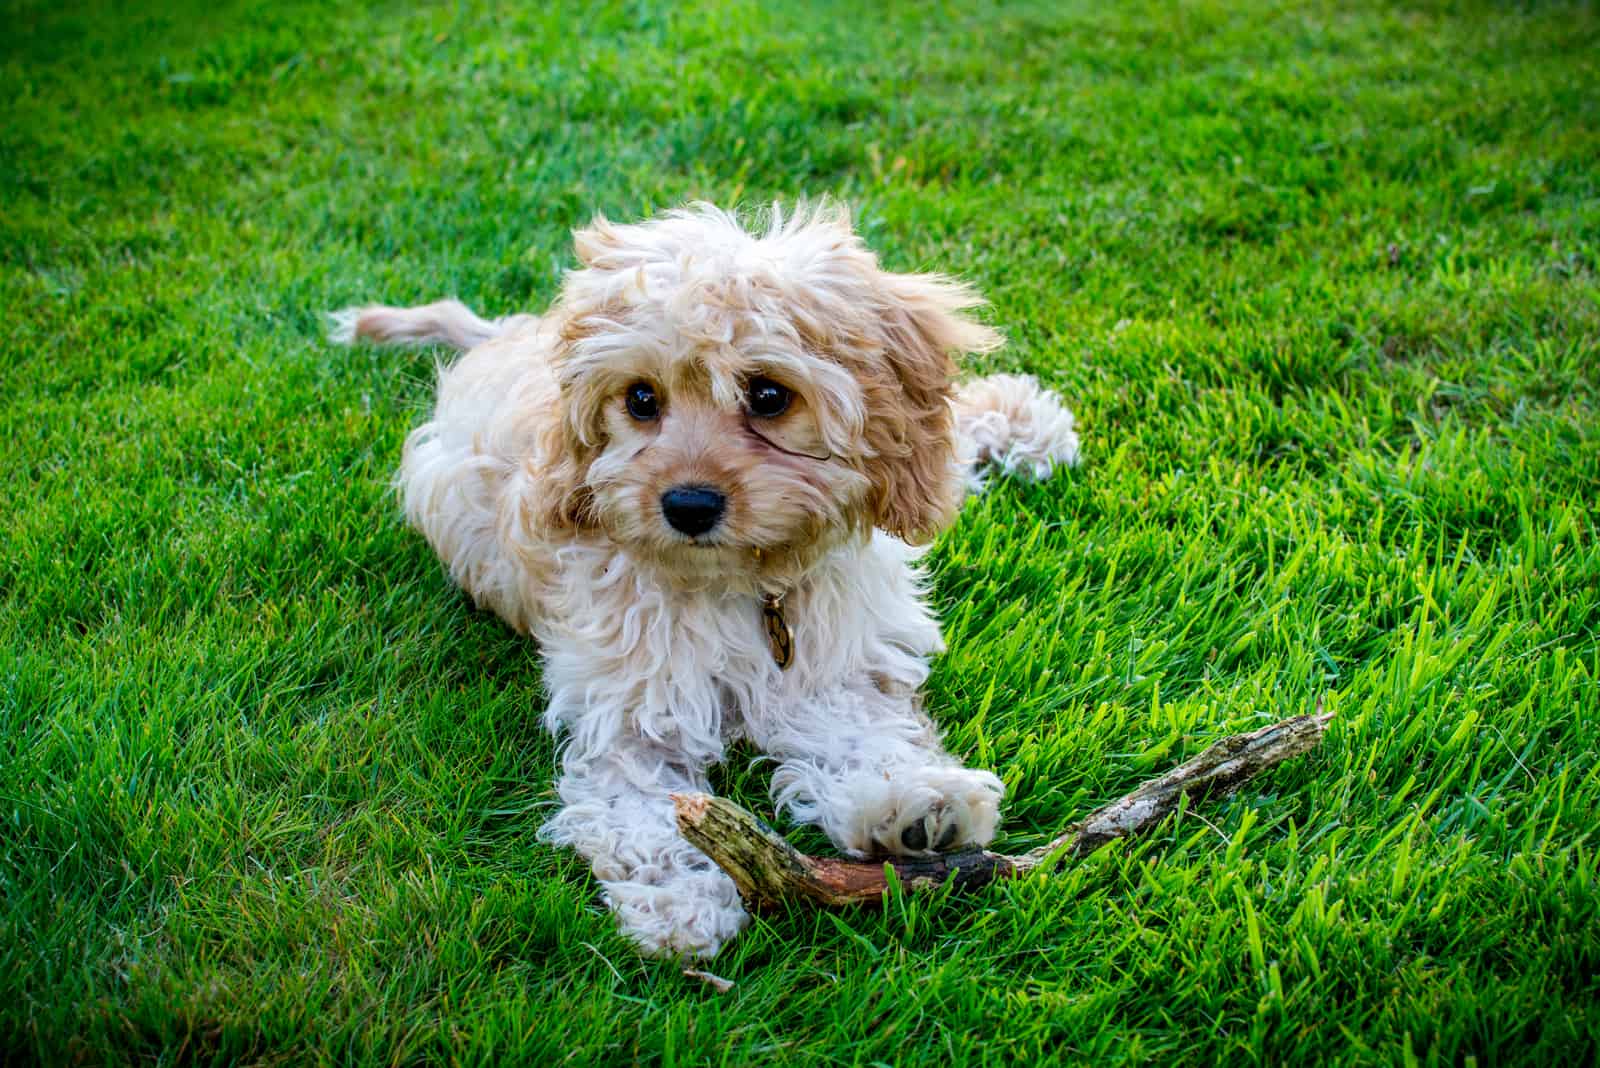 Cavapoo sitting on grass playing with stick